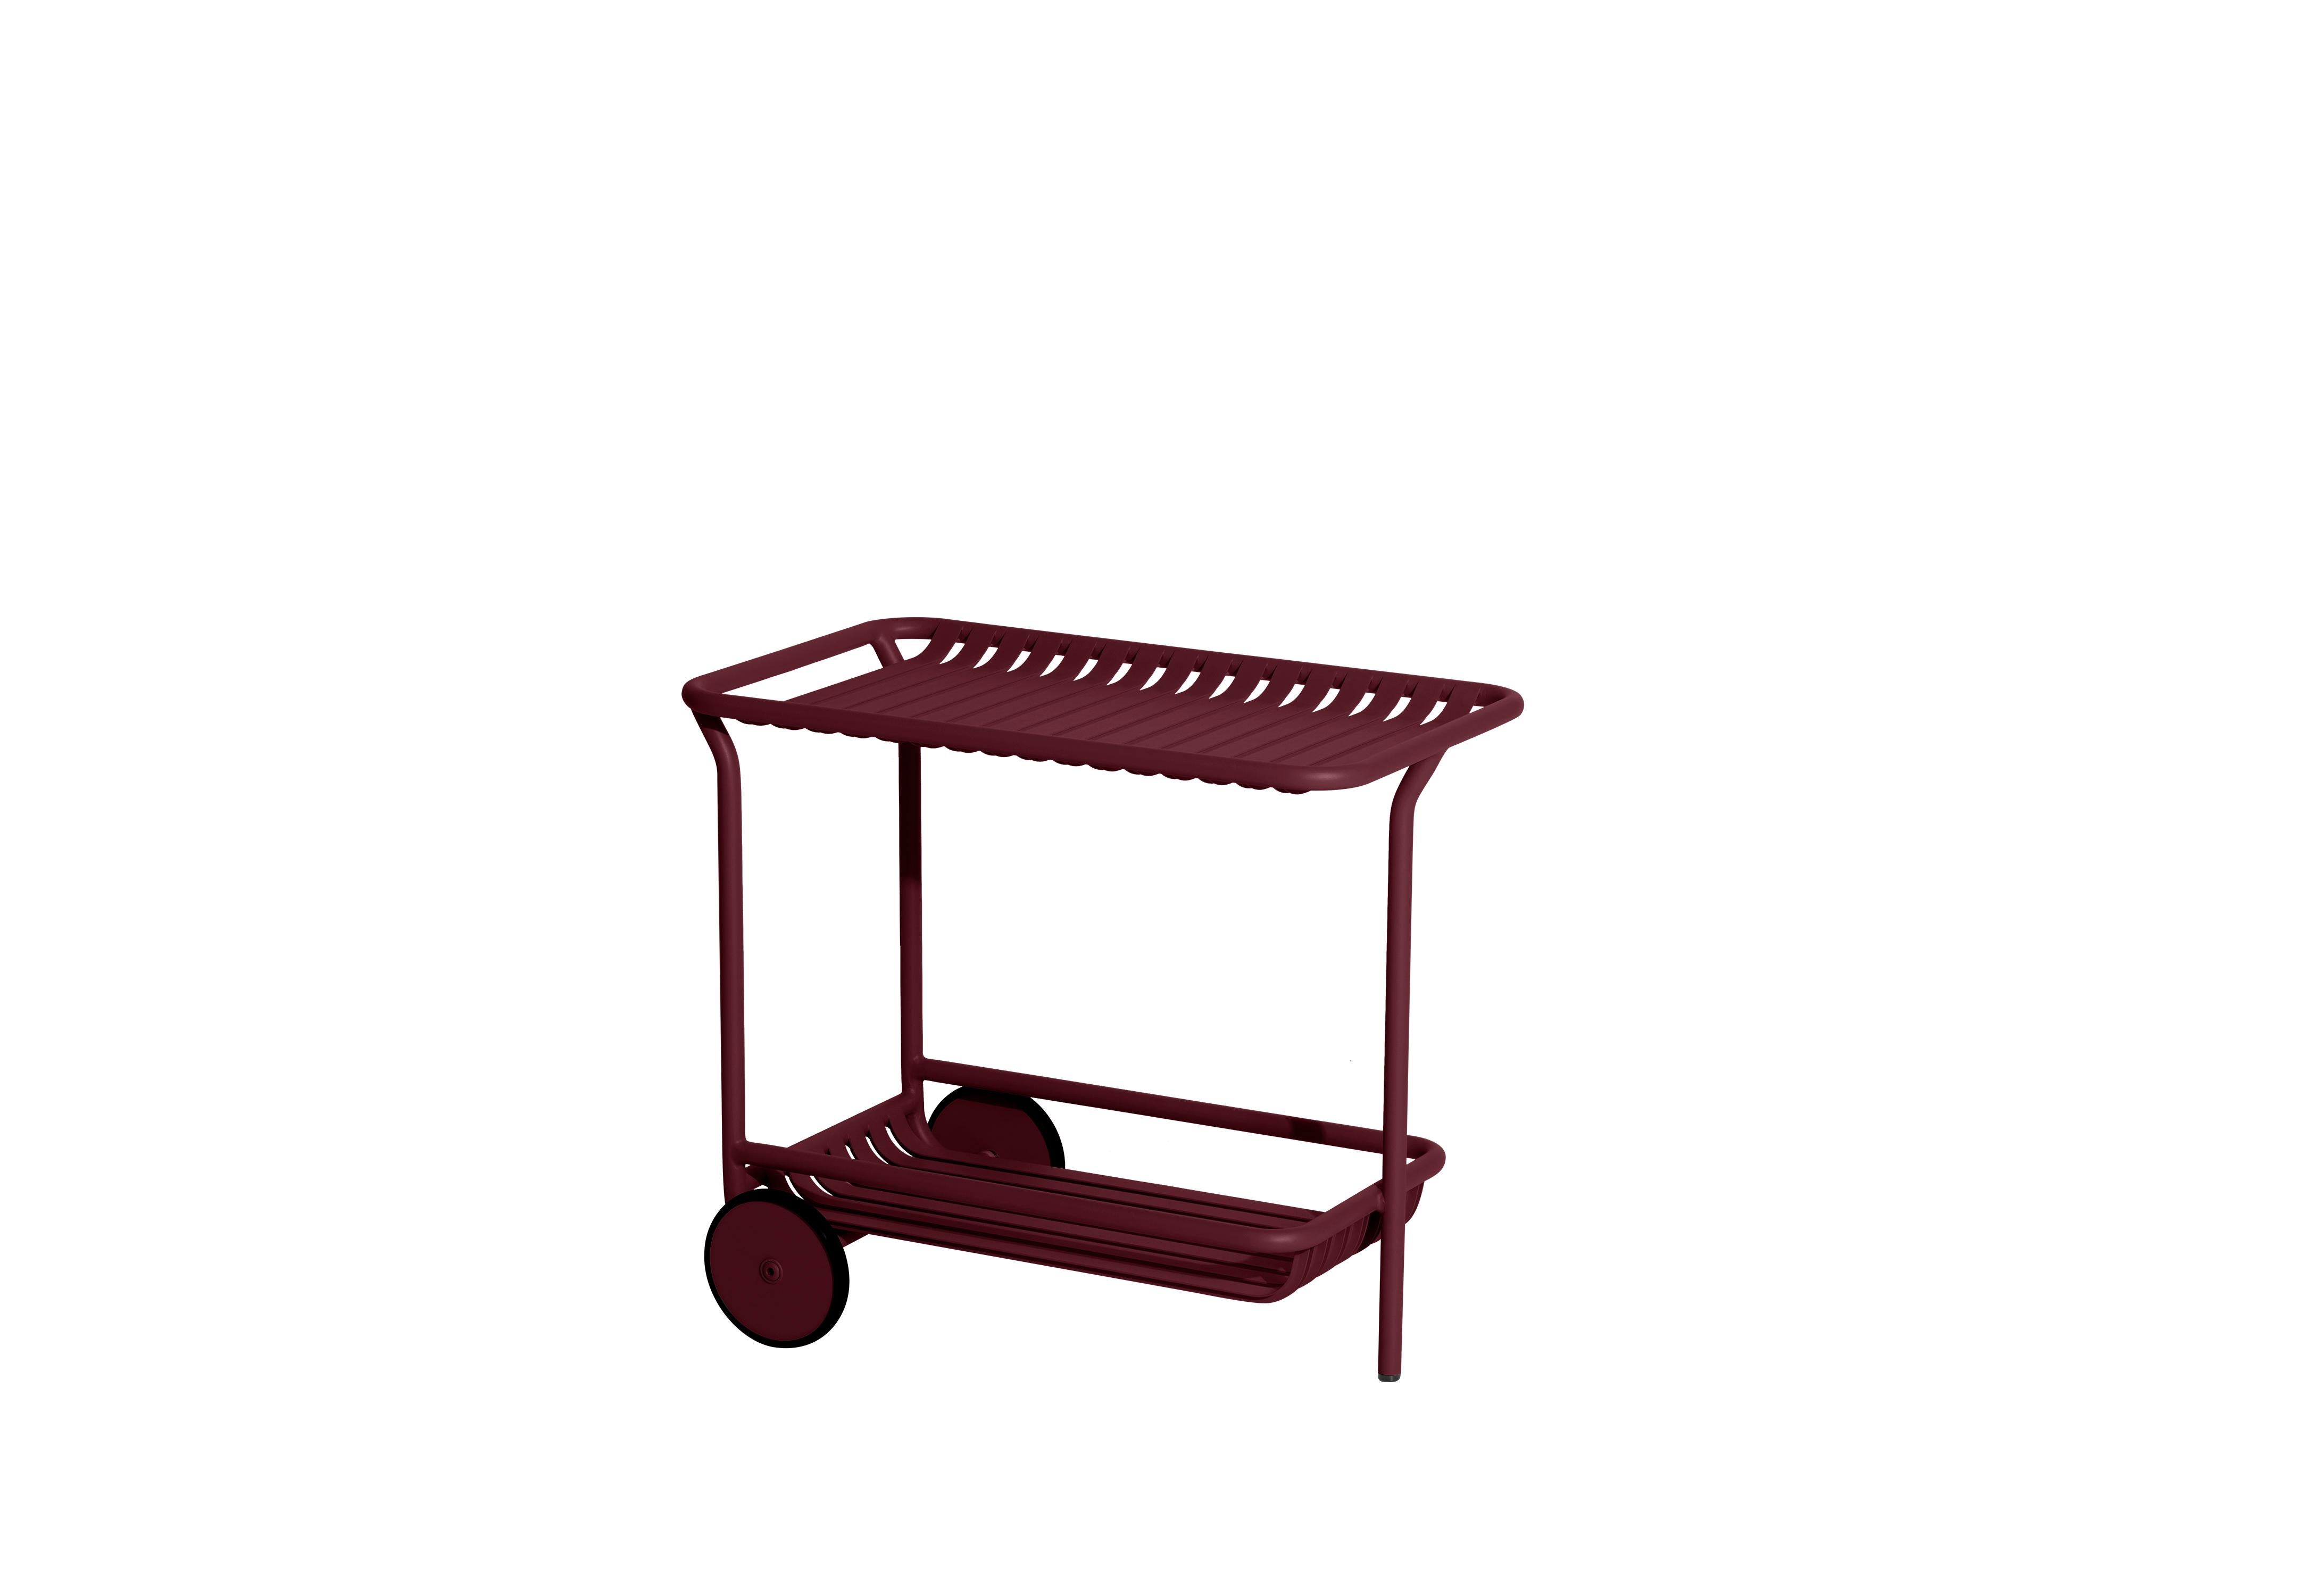 Petite Friture Week-End Trolley in Burgundy Aluminium by Studio BrichetZiegler, 2017

The week-end collection is a full range of outdoor furniture, in aluminium grained epoxy paint, matt finish, that includes 18 functions and 8 colours for the